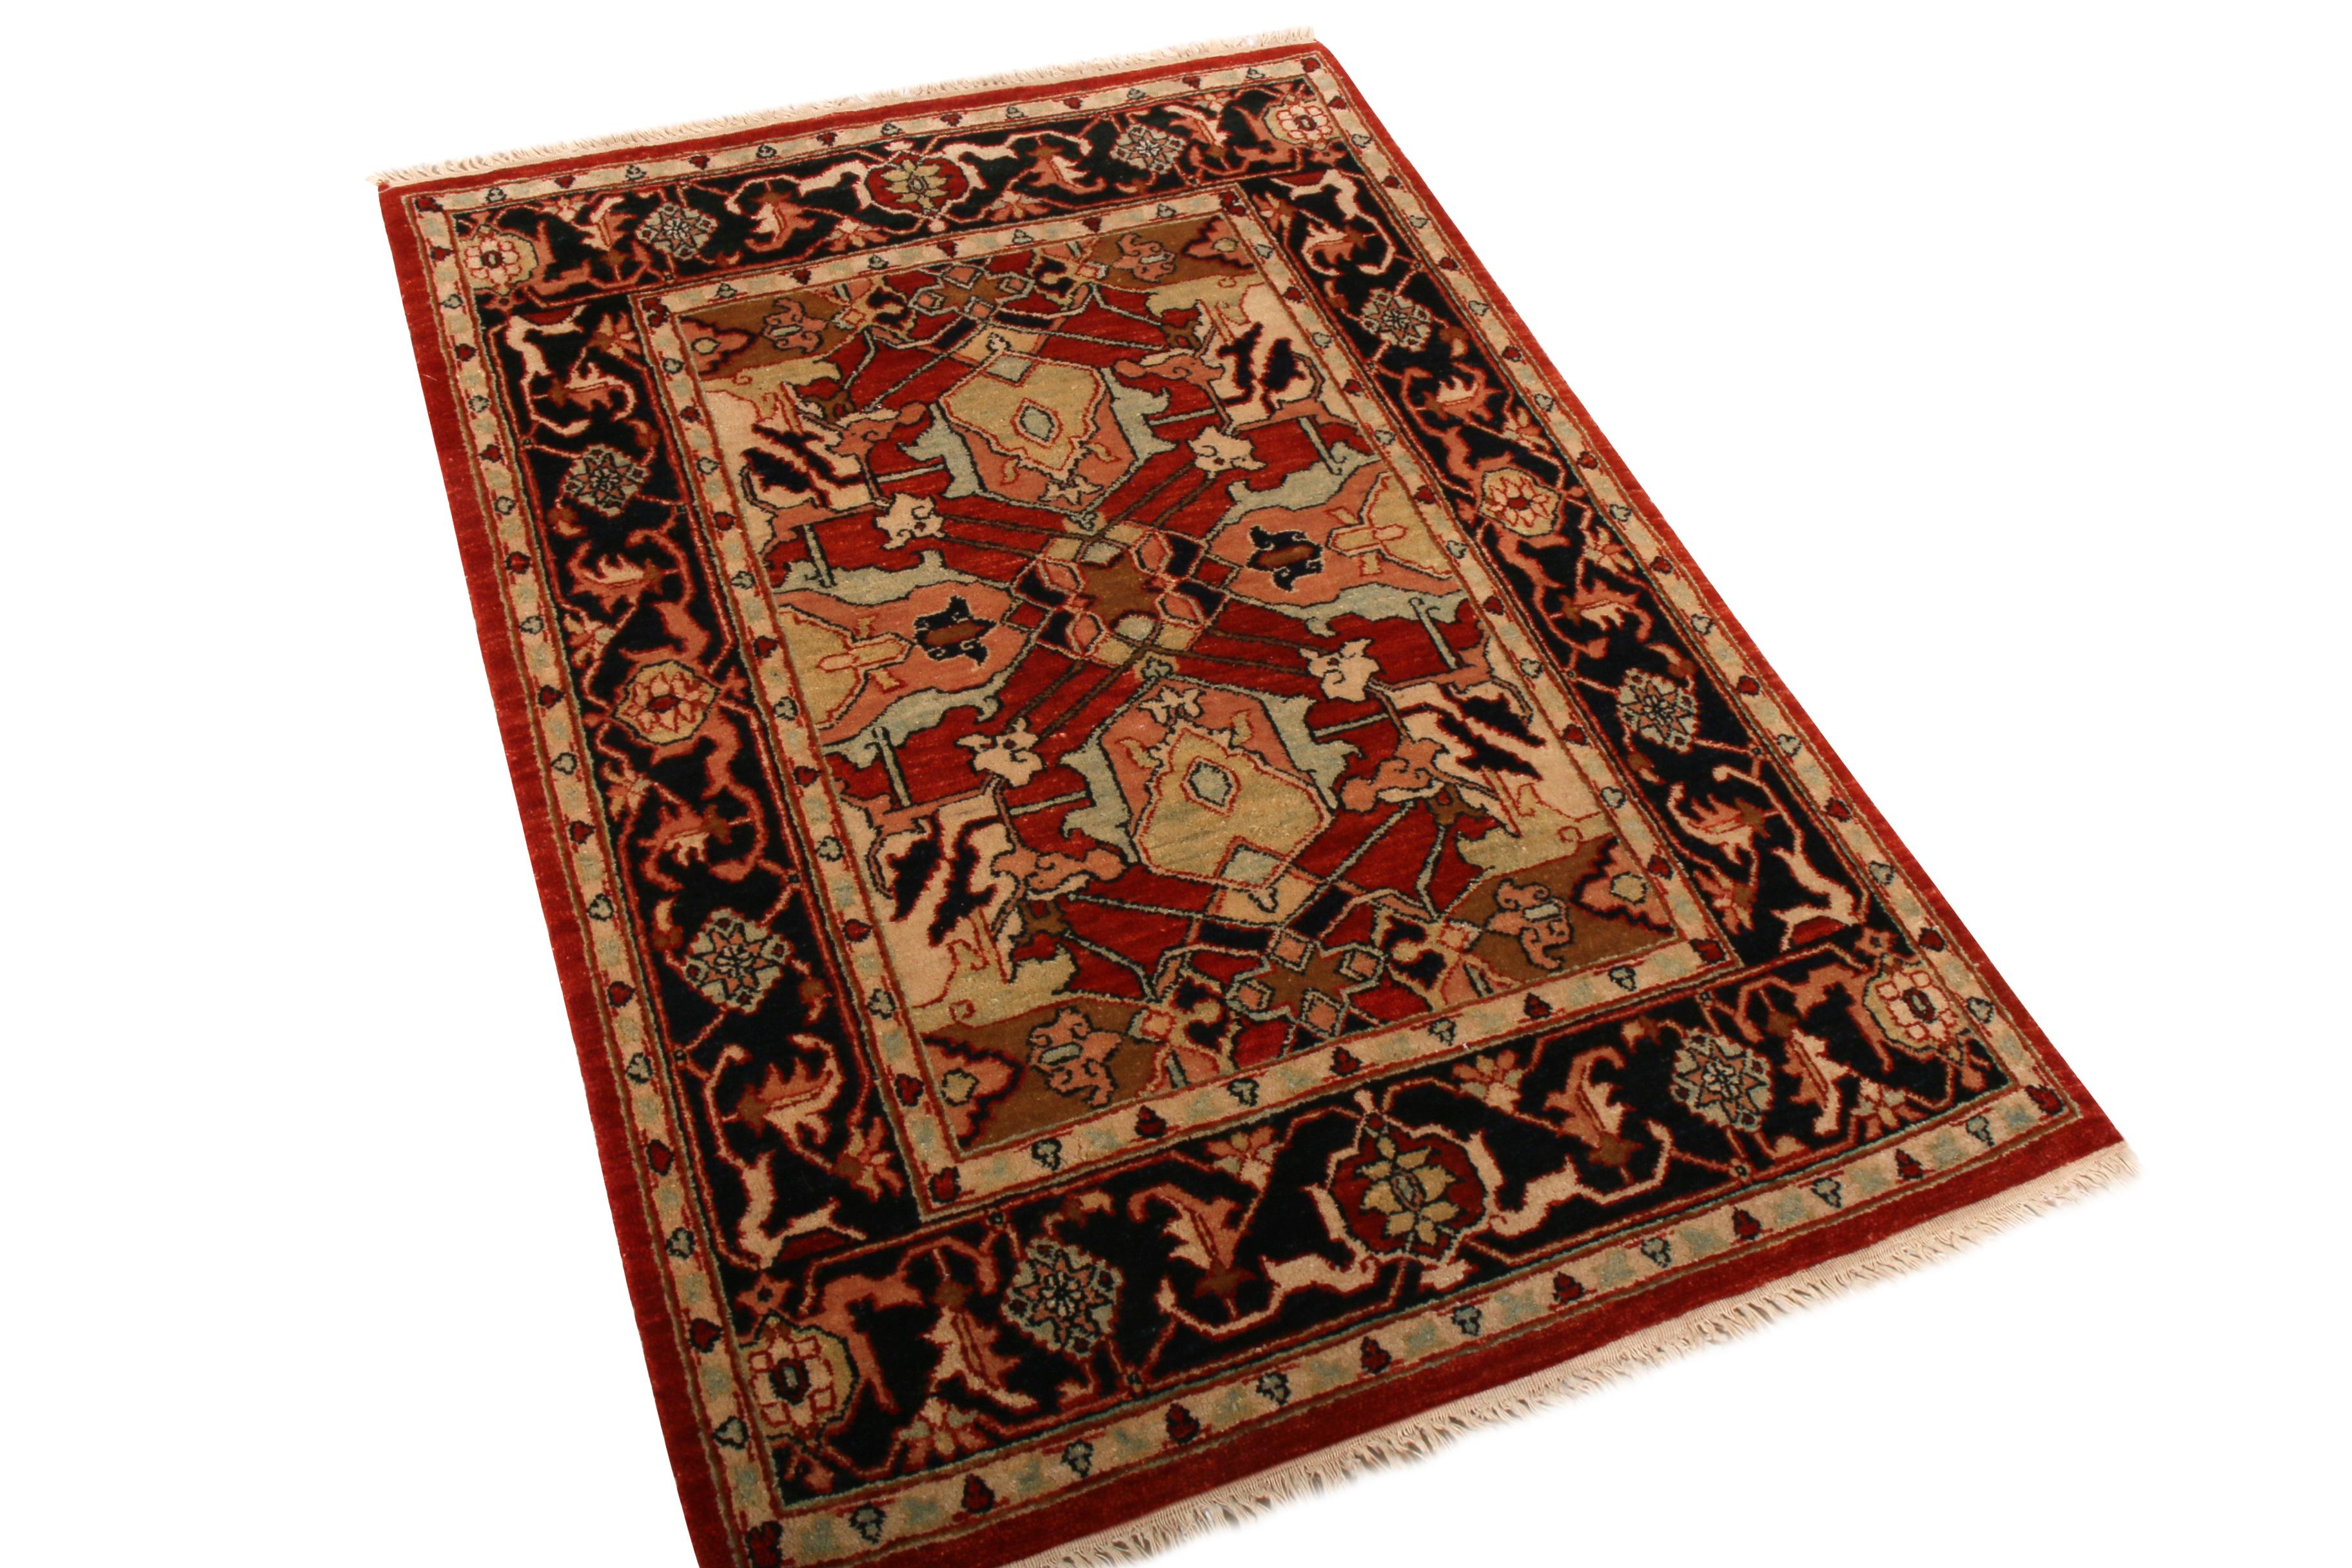 Hand knotted in wool originating from the few remaining collaborations between renowned creators George Yevremovich and Teddy Sumner, this item is a contemporary rug between 20-25 years old, hand made in the 1990s with subtle nods to classic Persian